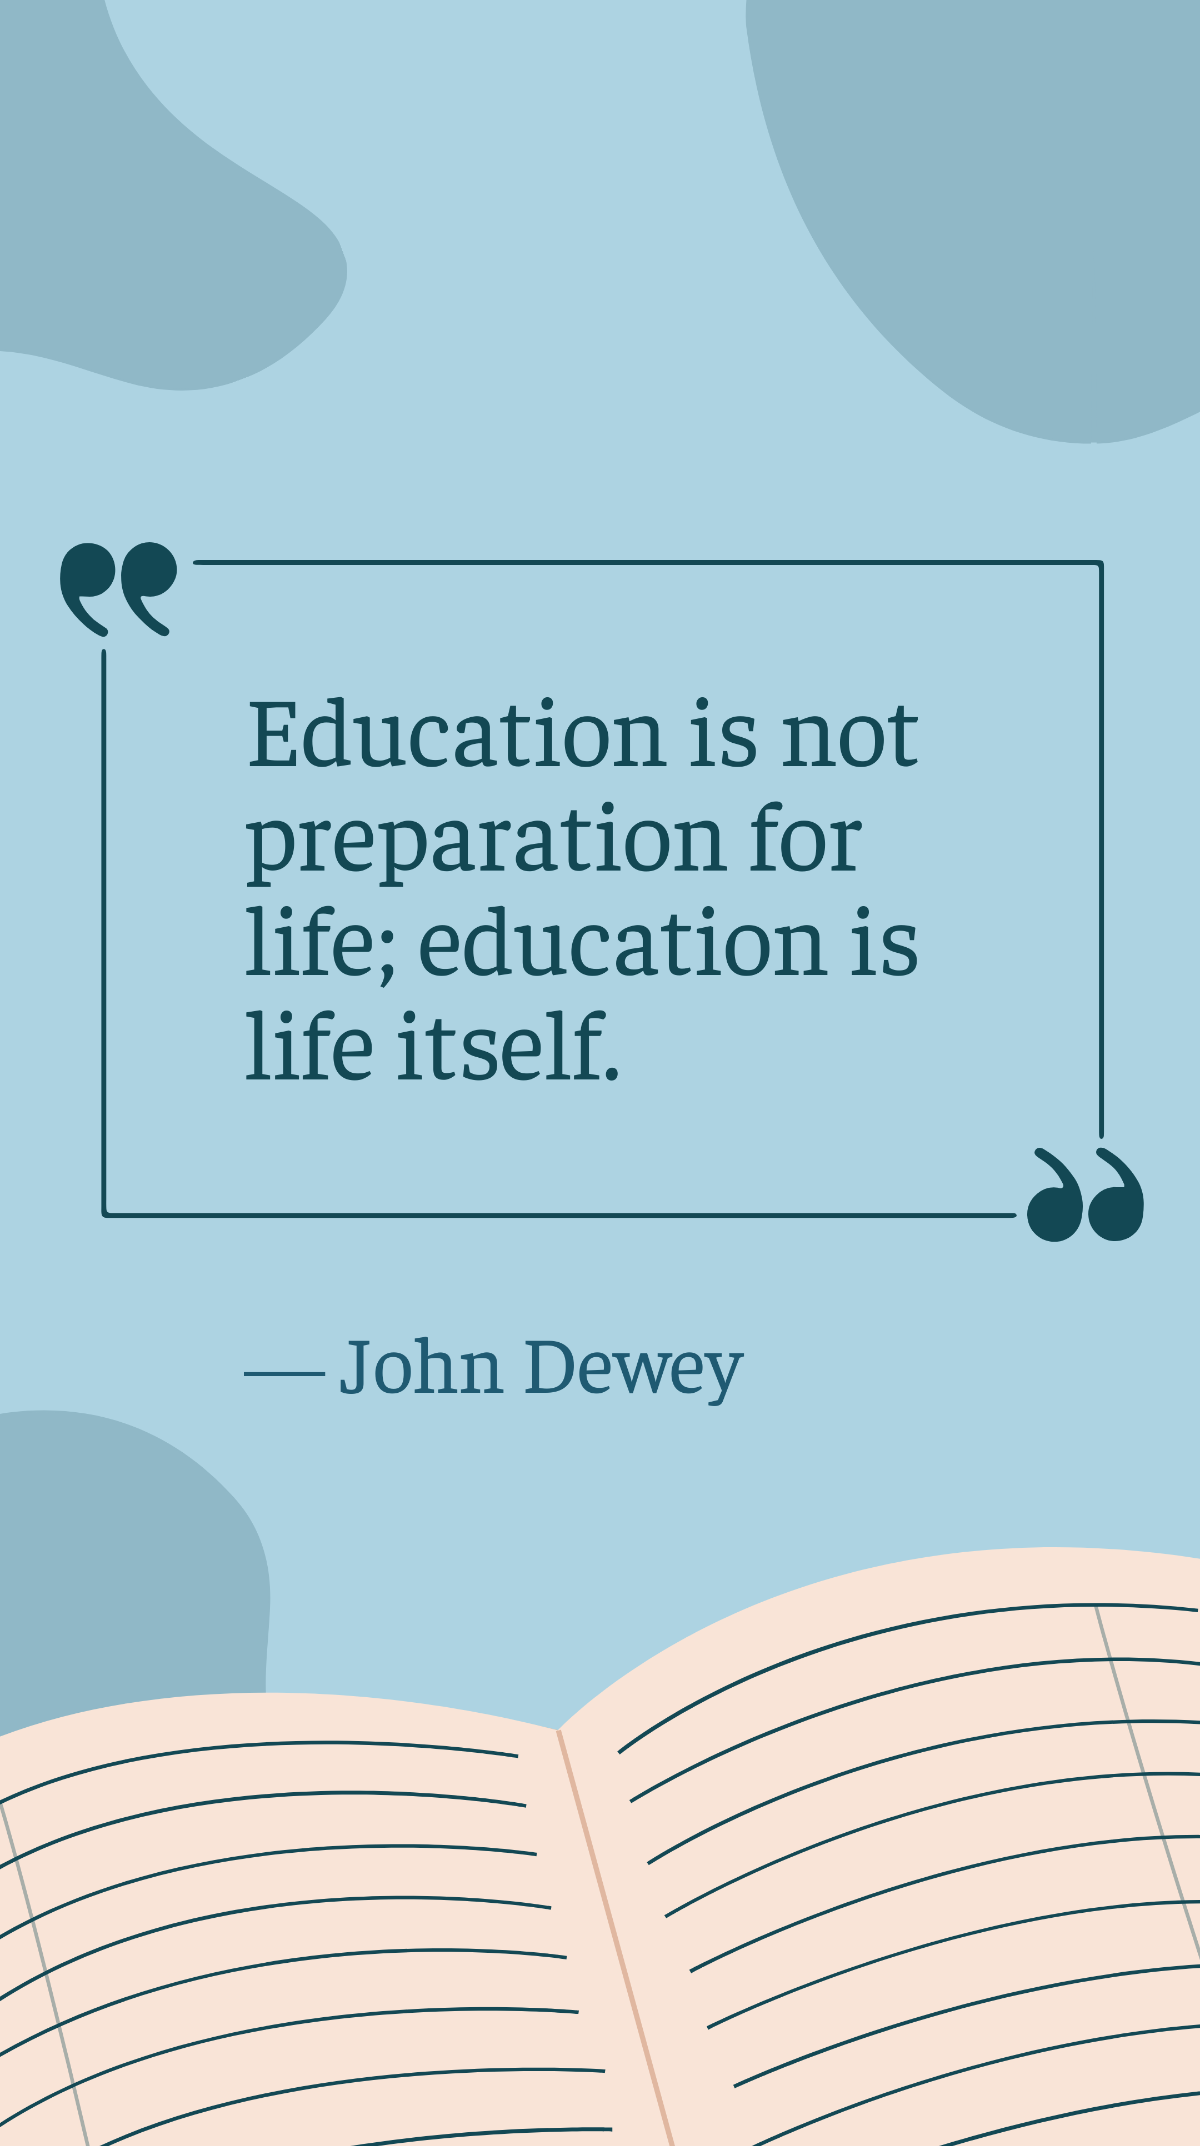 John Dewey - Education is not preparation for life; education is life itself. Template